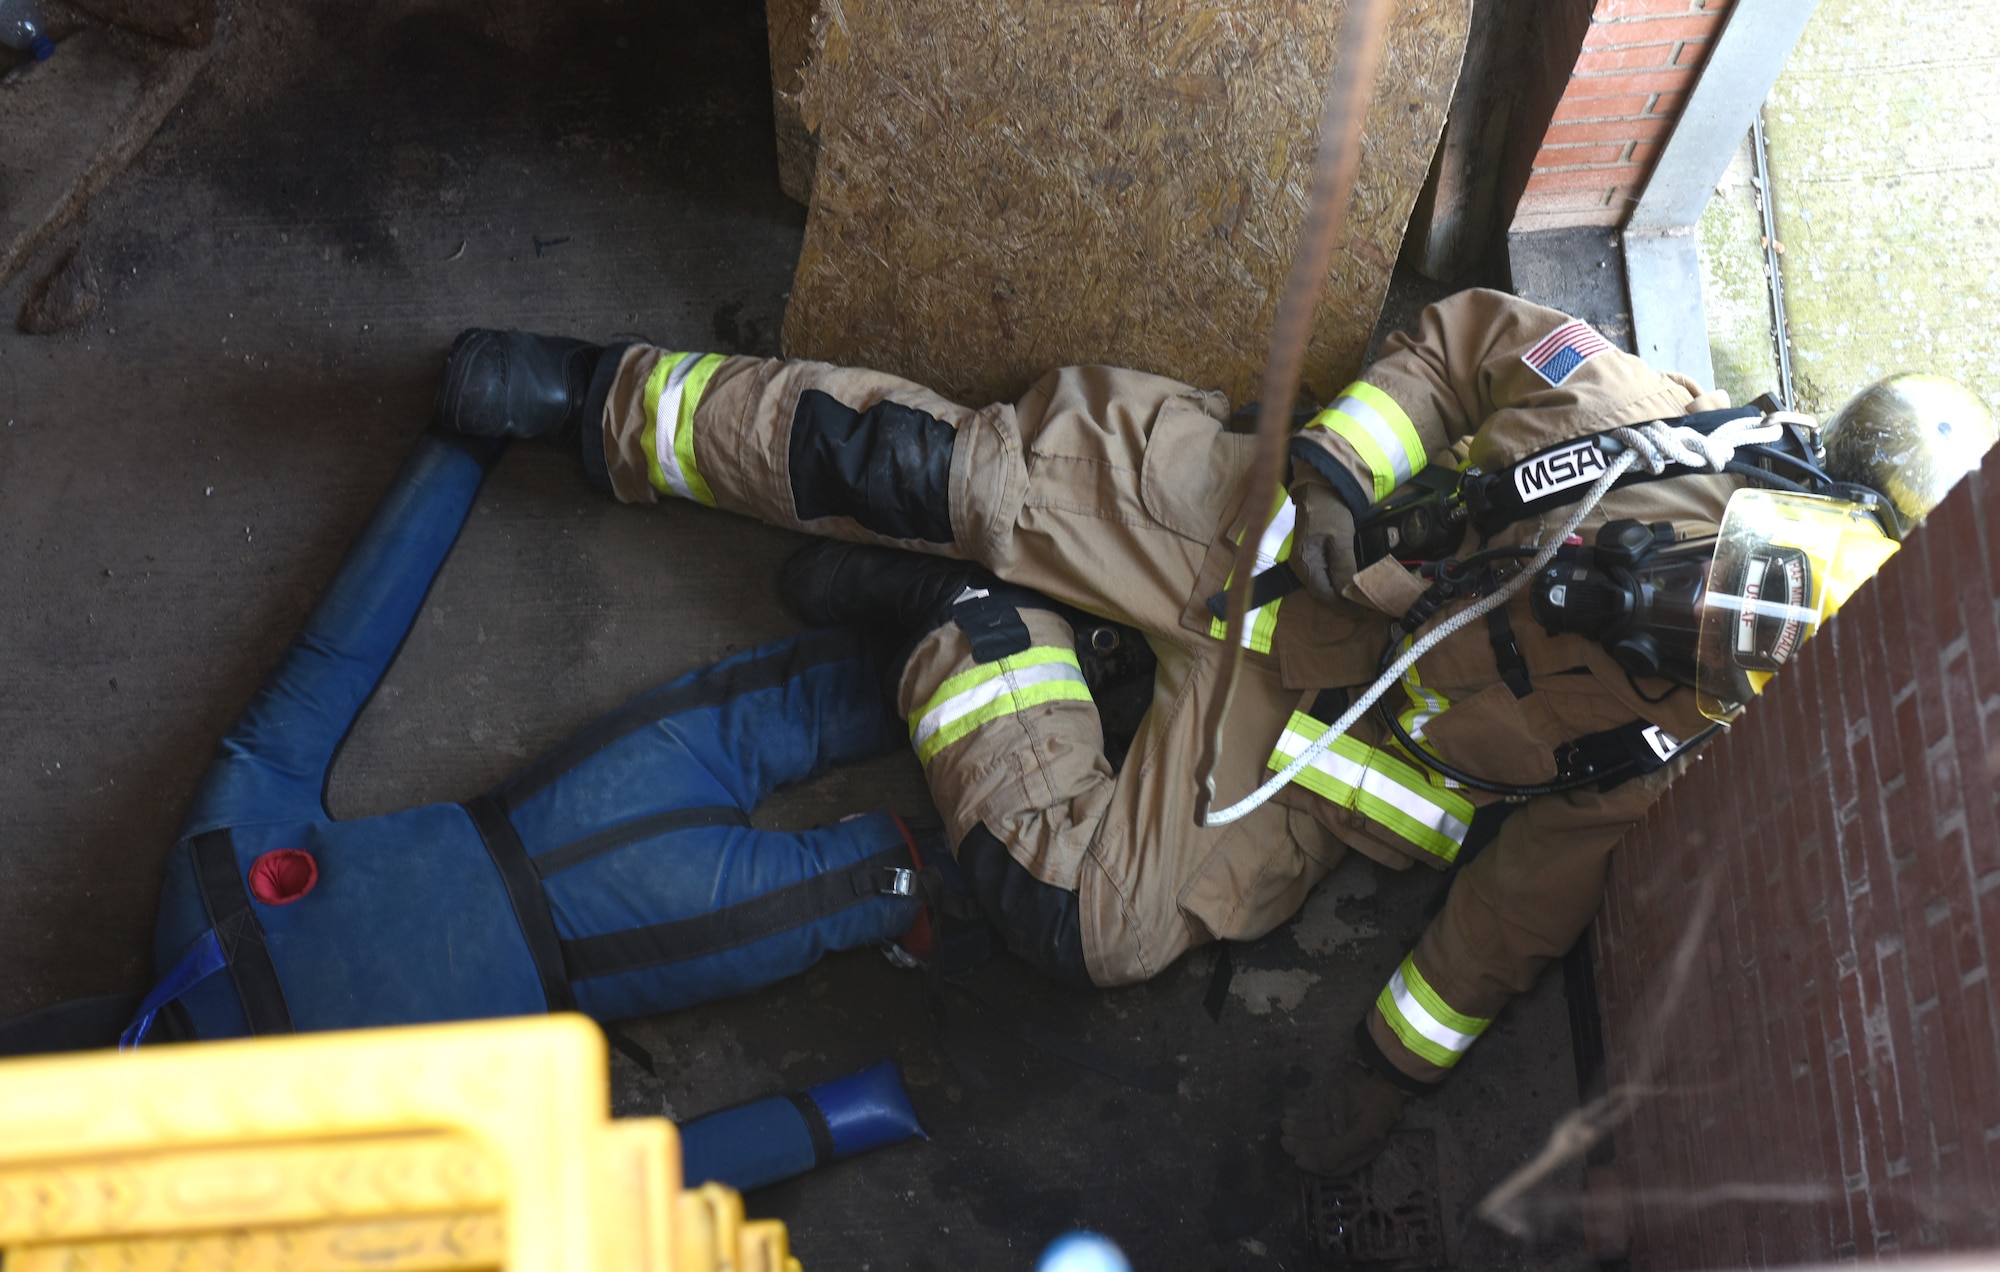 U.S. Air Force Airman 1st Class Robert Cataldo, 100th Civil Engineer Squadron Fire Department firefighter, simulates being a second casualty during a confined space training exercise at Royal Air Force Mildenhall, England, April 14, 2022. The scenario involved a teenager (simulated by a mannequin) who fell and was injured after climbing down into a facility. While climbing down to rescue the victim, Cataldo simulated falling after slipping on a broken step, so other firefighters from his team had to complete the rescue. This type of training is vital to the first responders to provide them with the necessary skills to extricate wounded or trapped personnel, including high-angle litter and stretcher evacuation. (U.S. Air Force photo by Karen Abeyasekere)